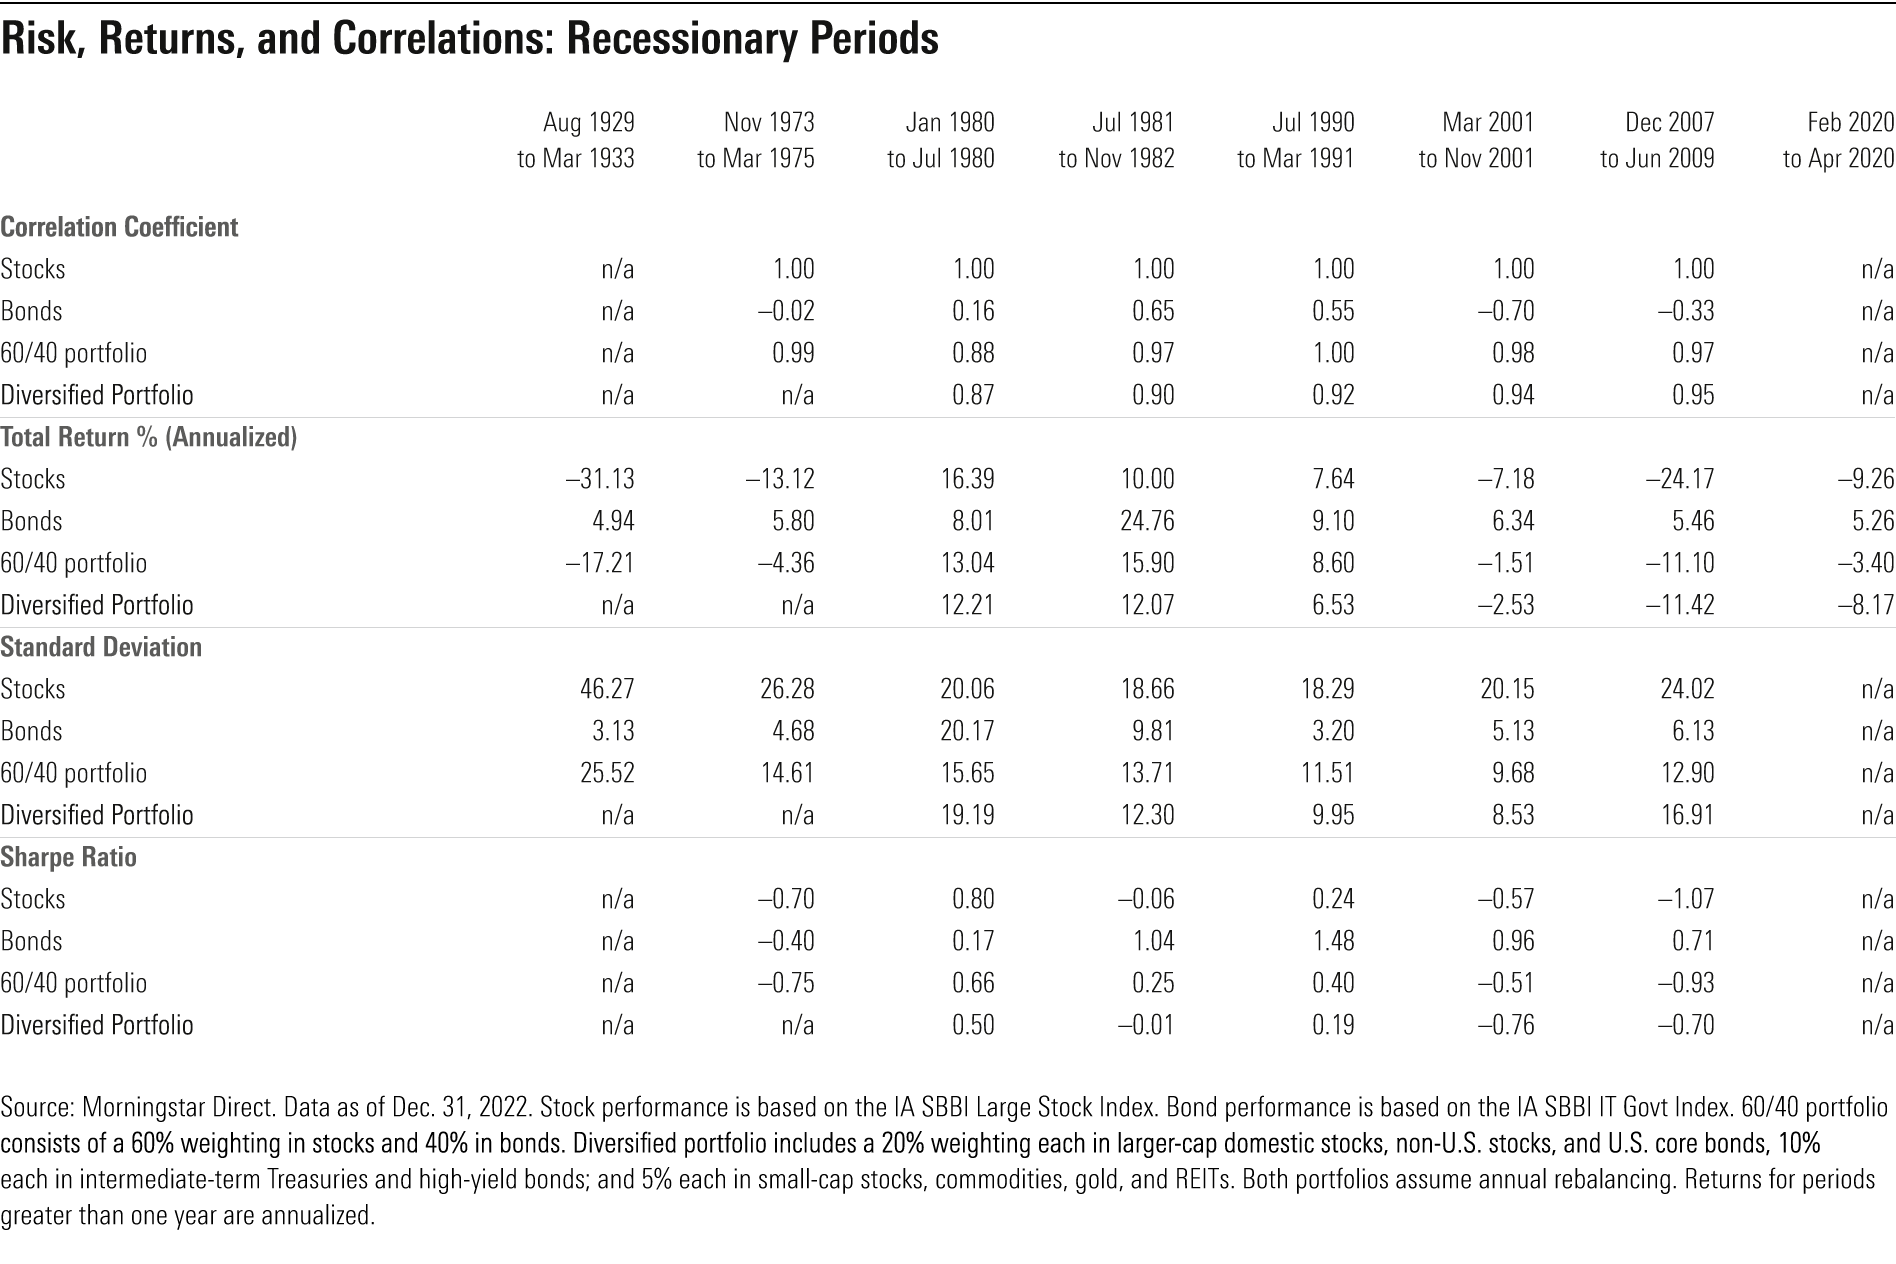 A table of the returns, volatility, and correlations of U.S. large-cap stocks, U.S. Treasury bonds, a 60/40 mix of the two assets, and a diversified portfolio during eight recessionary periods.